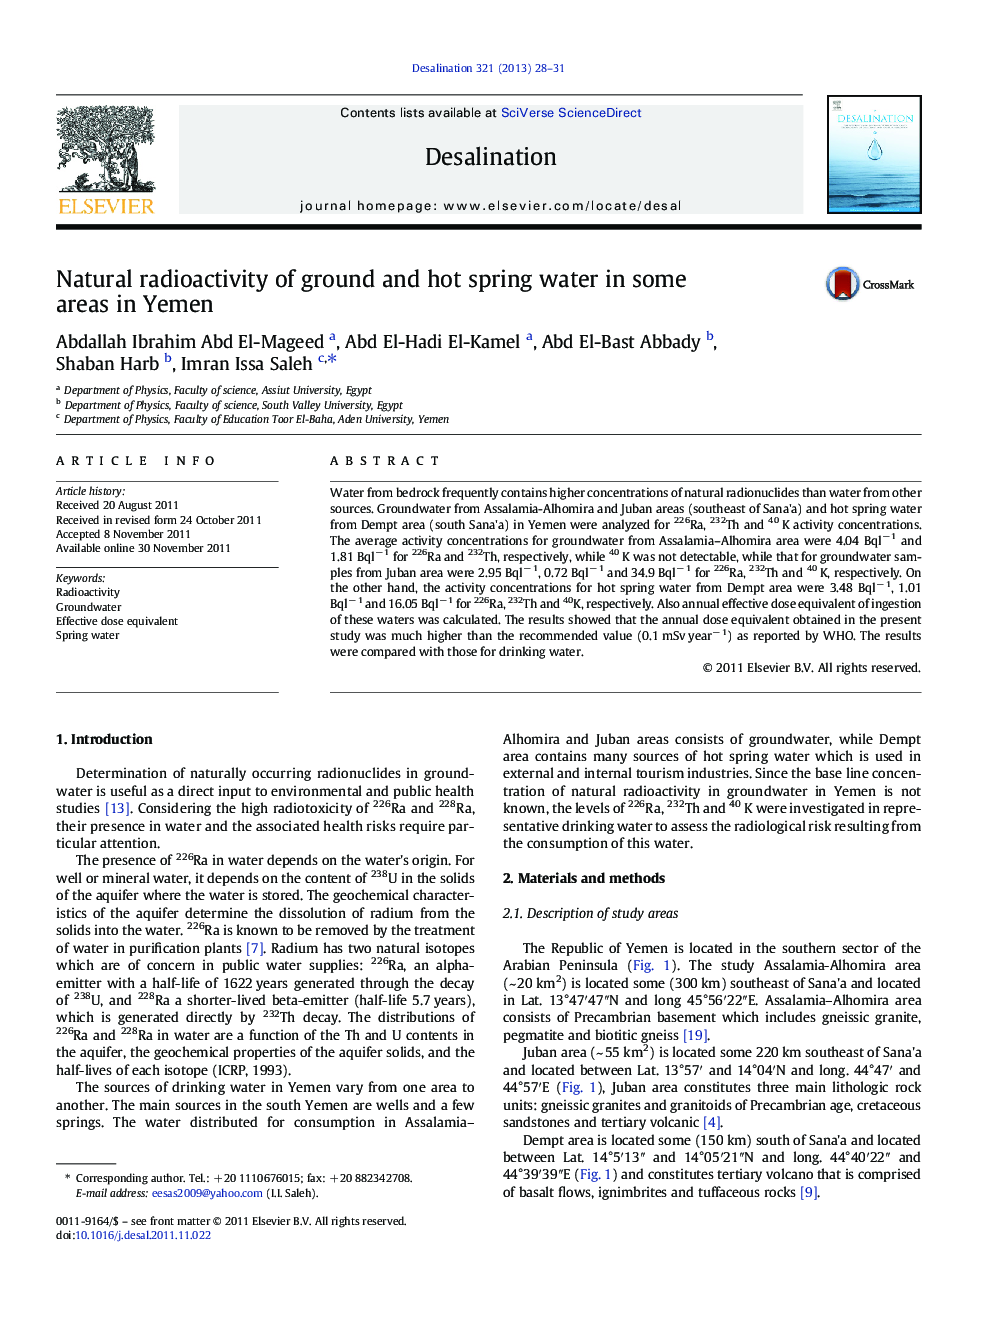 Natural radioactivity of ground and hot spring water in some areas in Yemen